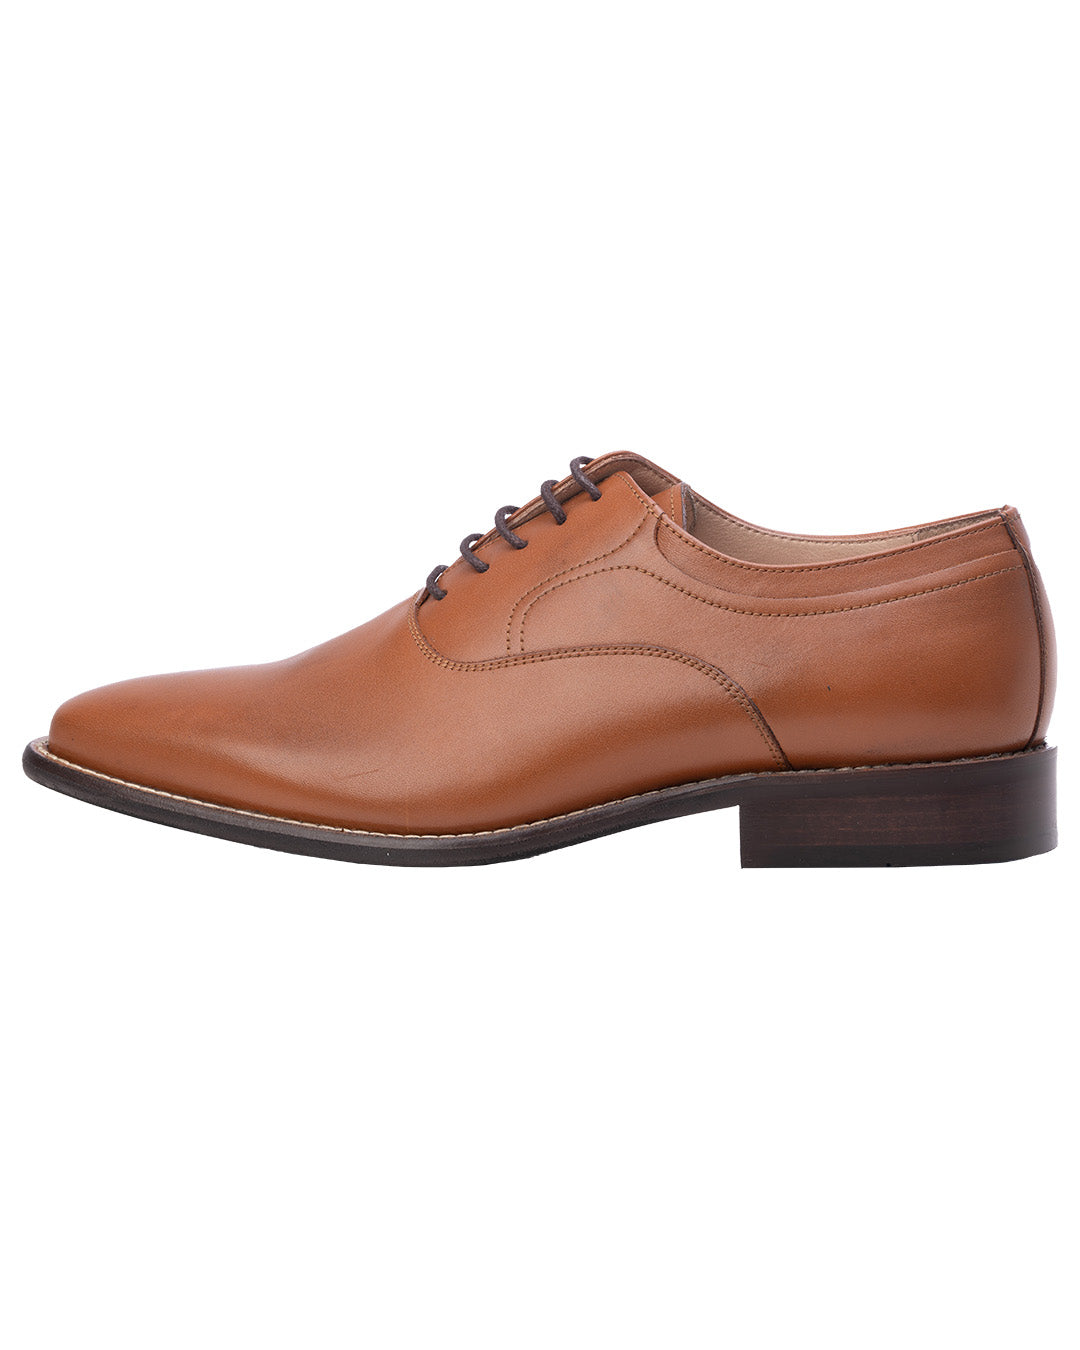 Tan Lace Up Leather Shoes